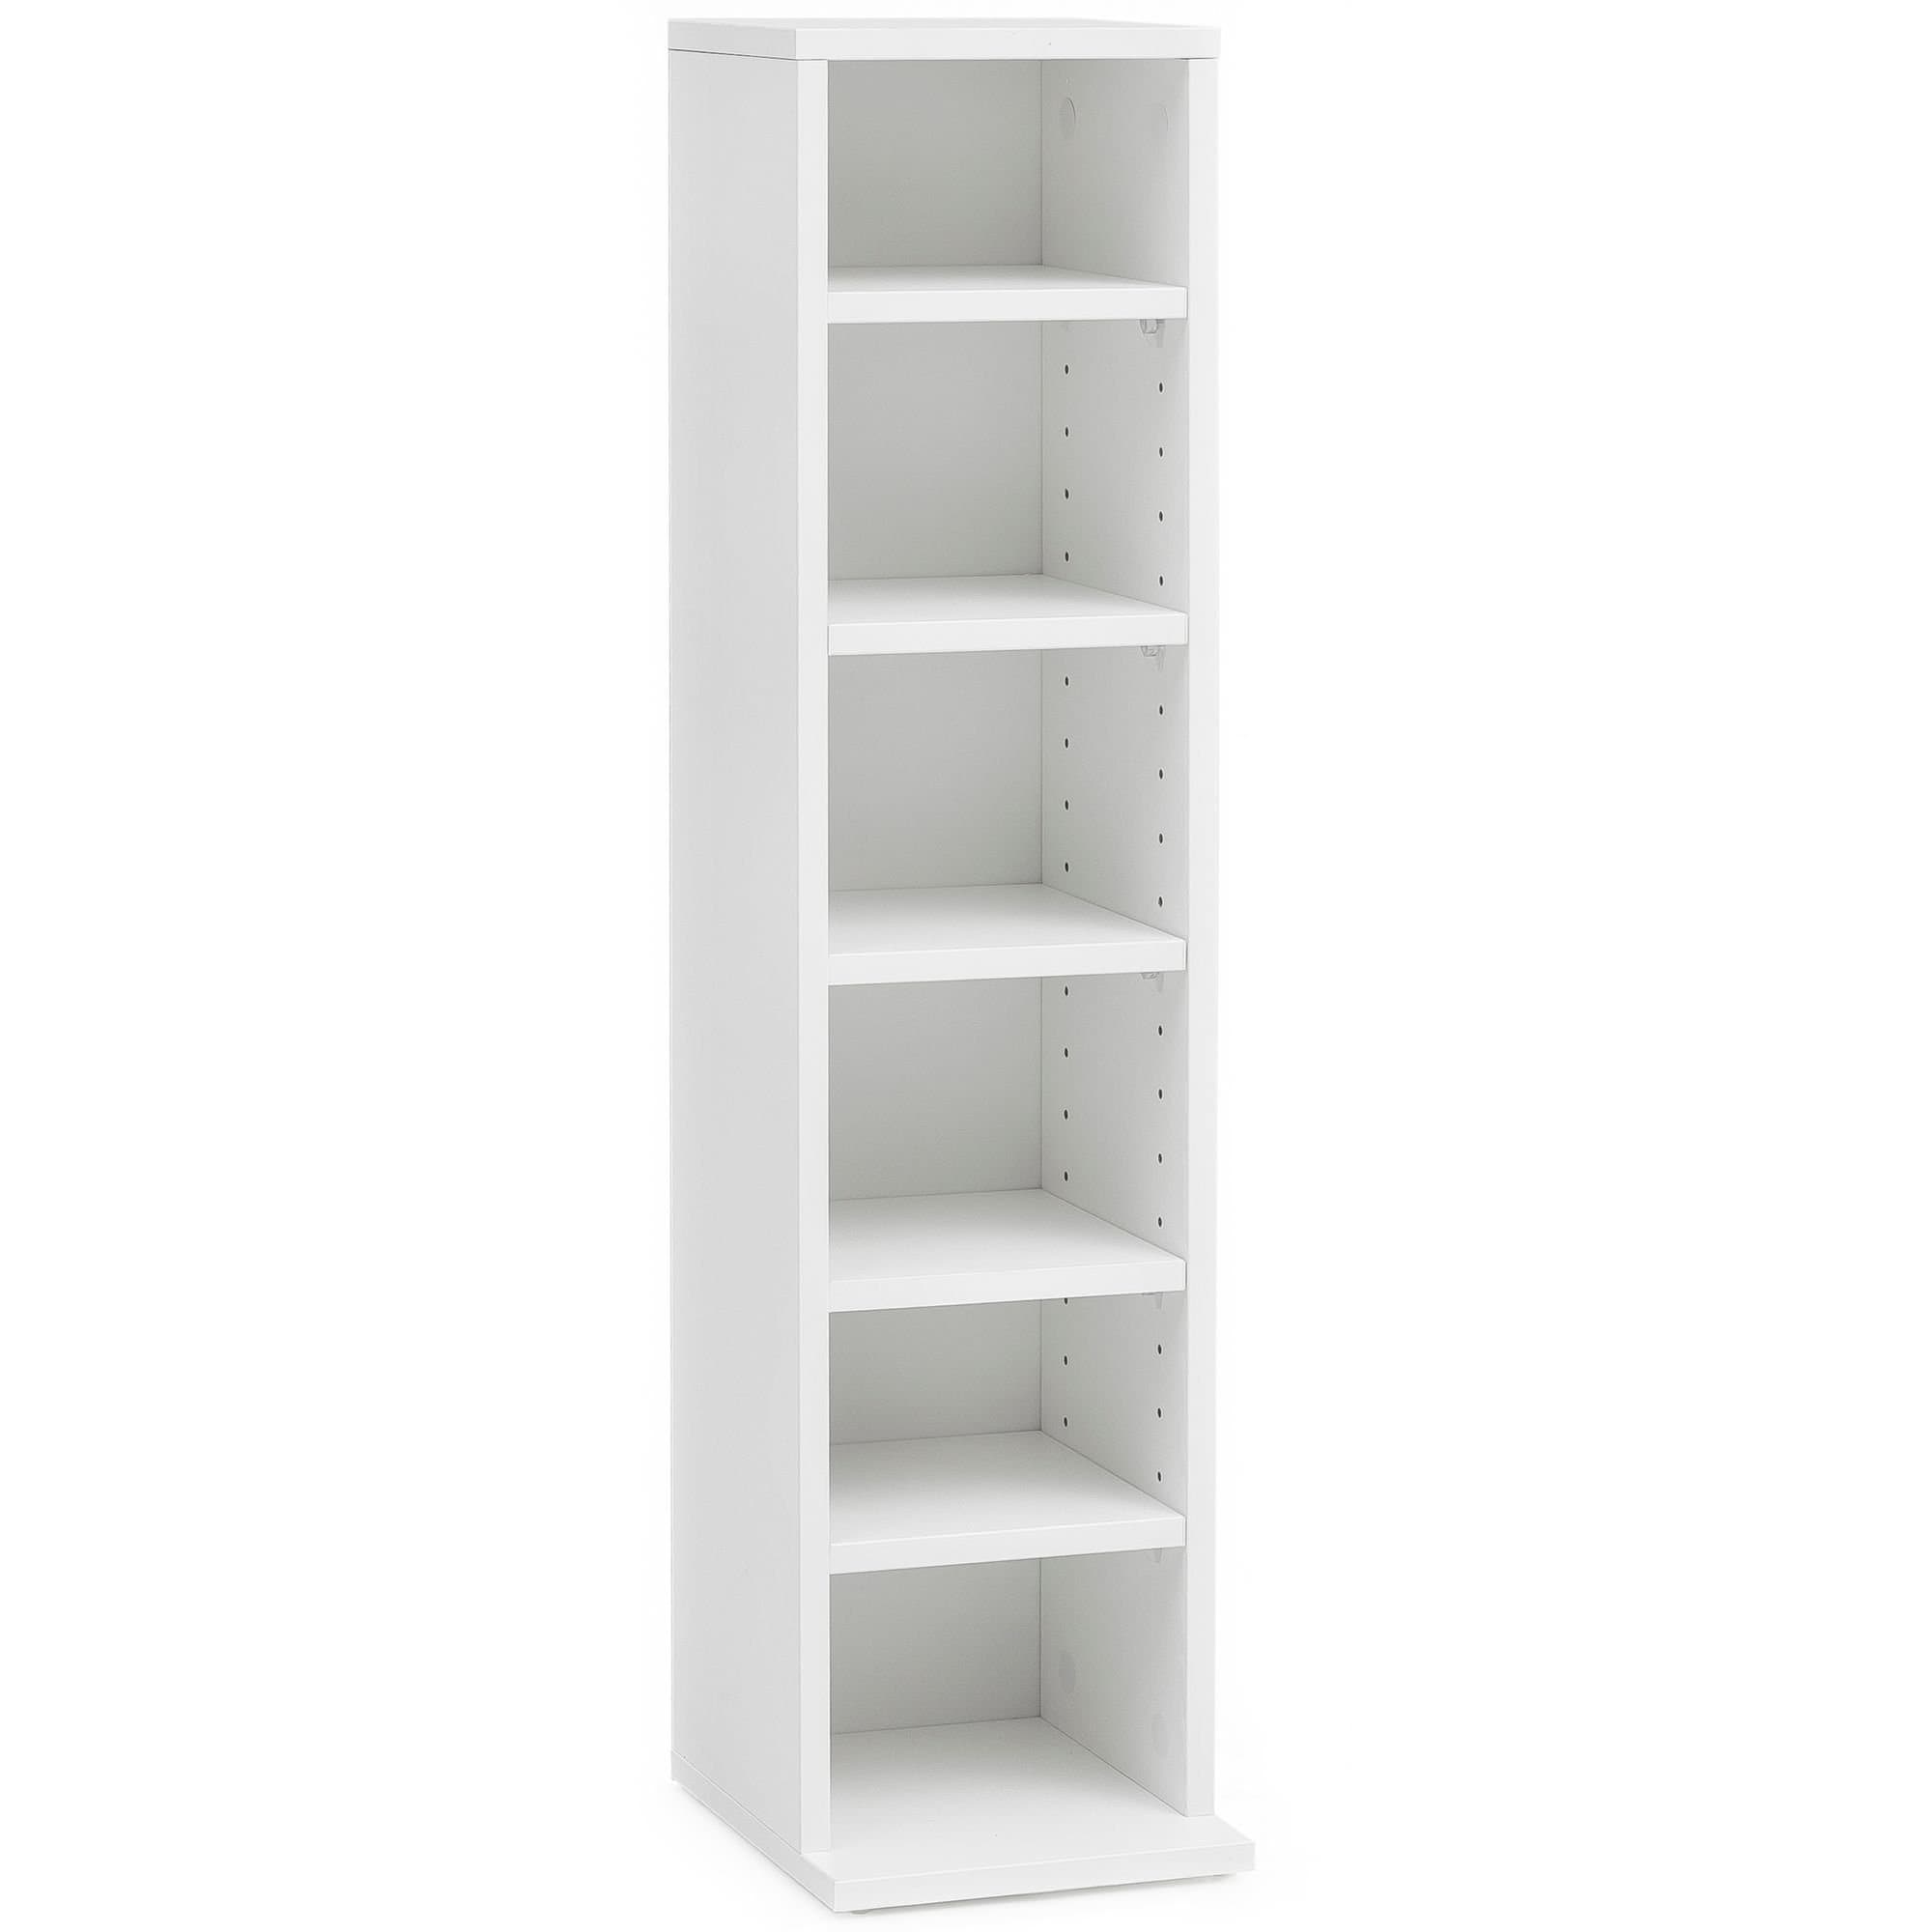 Nancy's bookcase with 6 drawers - Cabinets - Cupboard - White